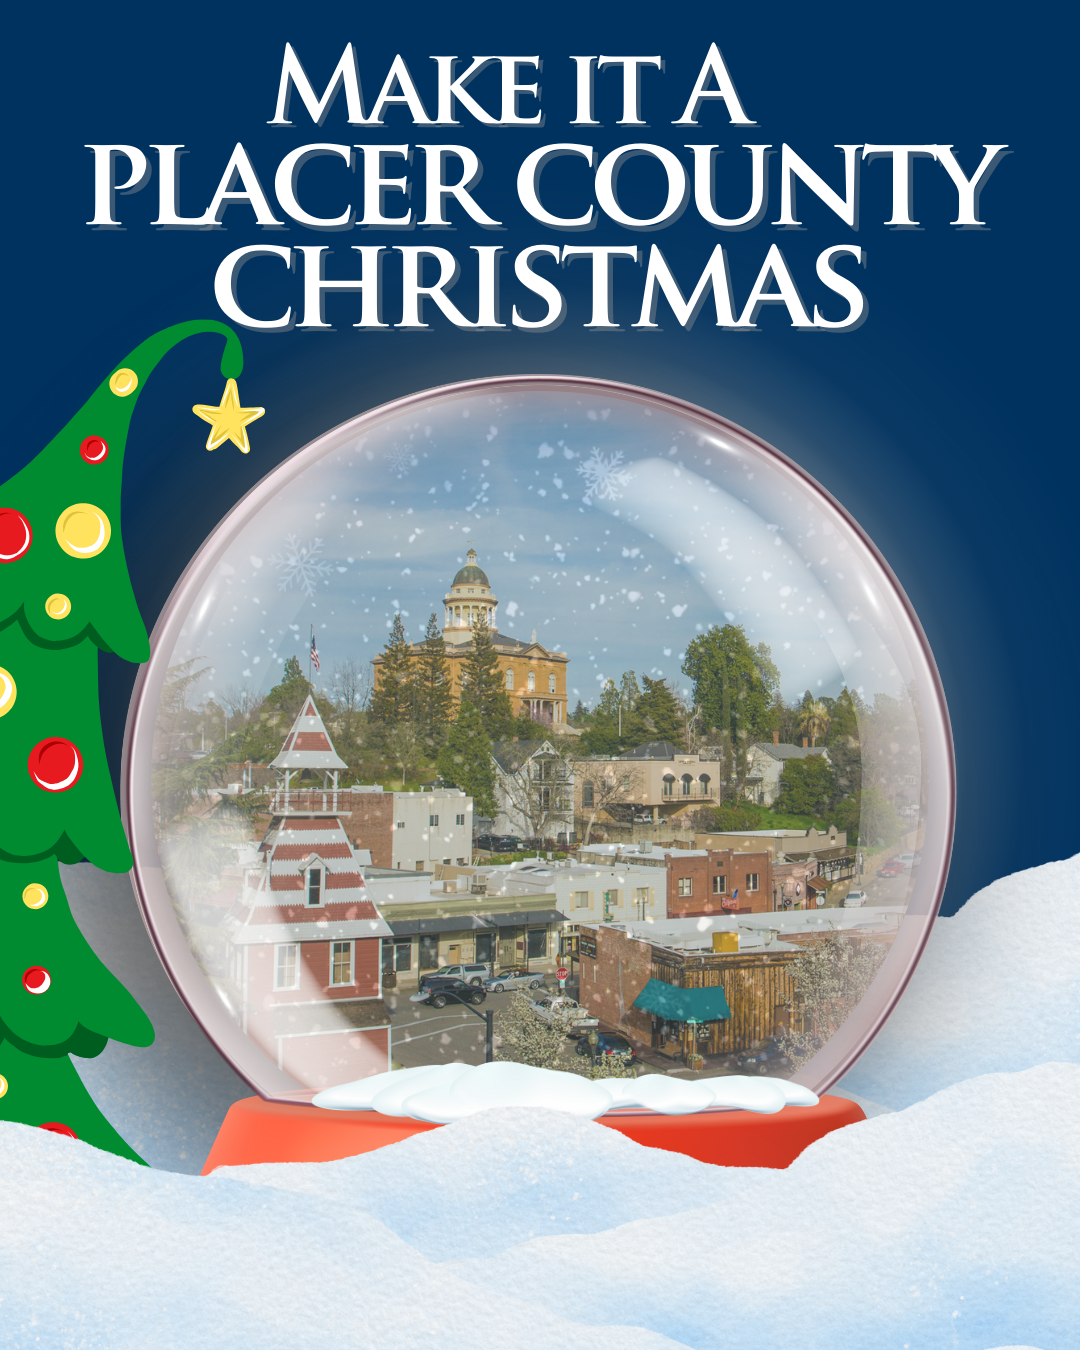 City of Auburn in a snow globe. Make it a Placer County Christmas